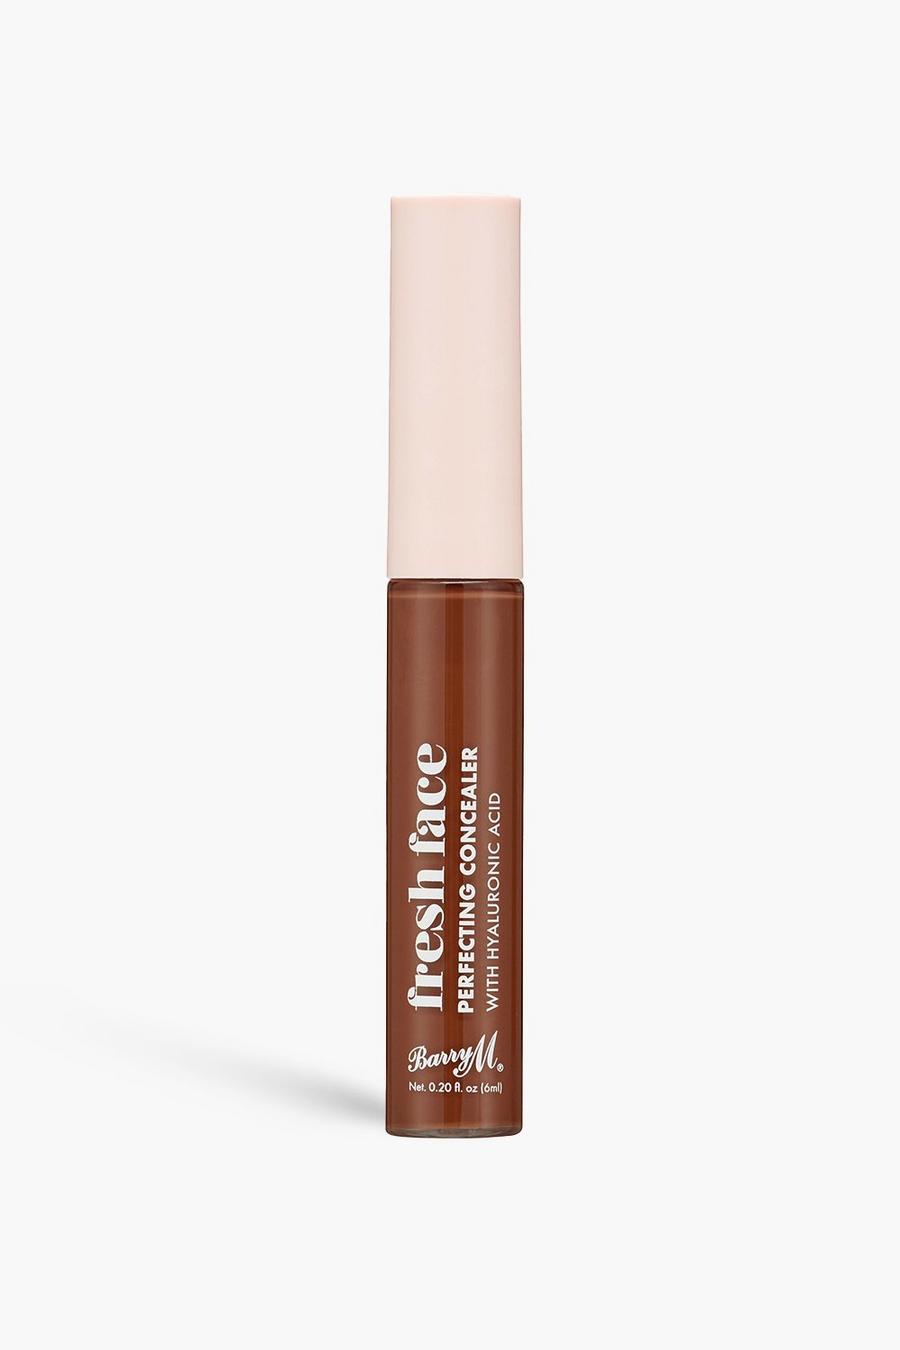 Barry M - Correttore Fresh Face Perfecting Concealer 19, Brown